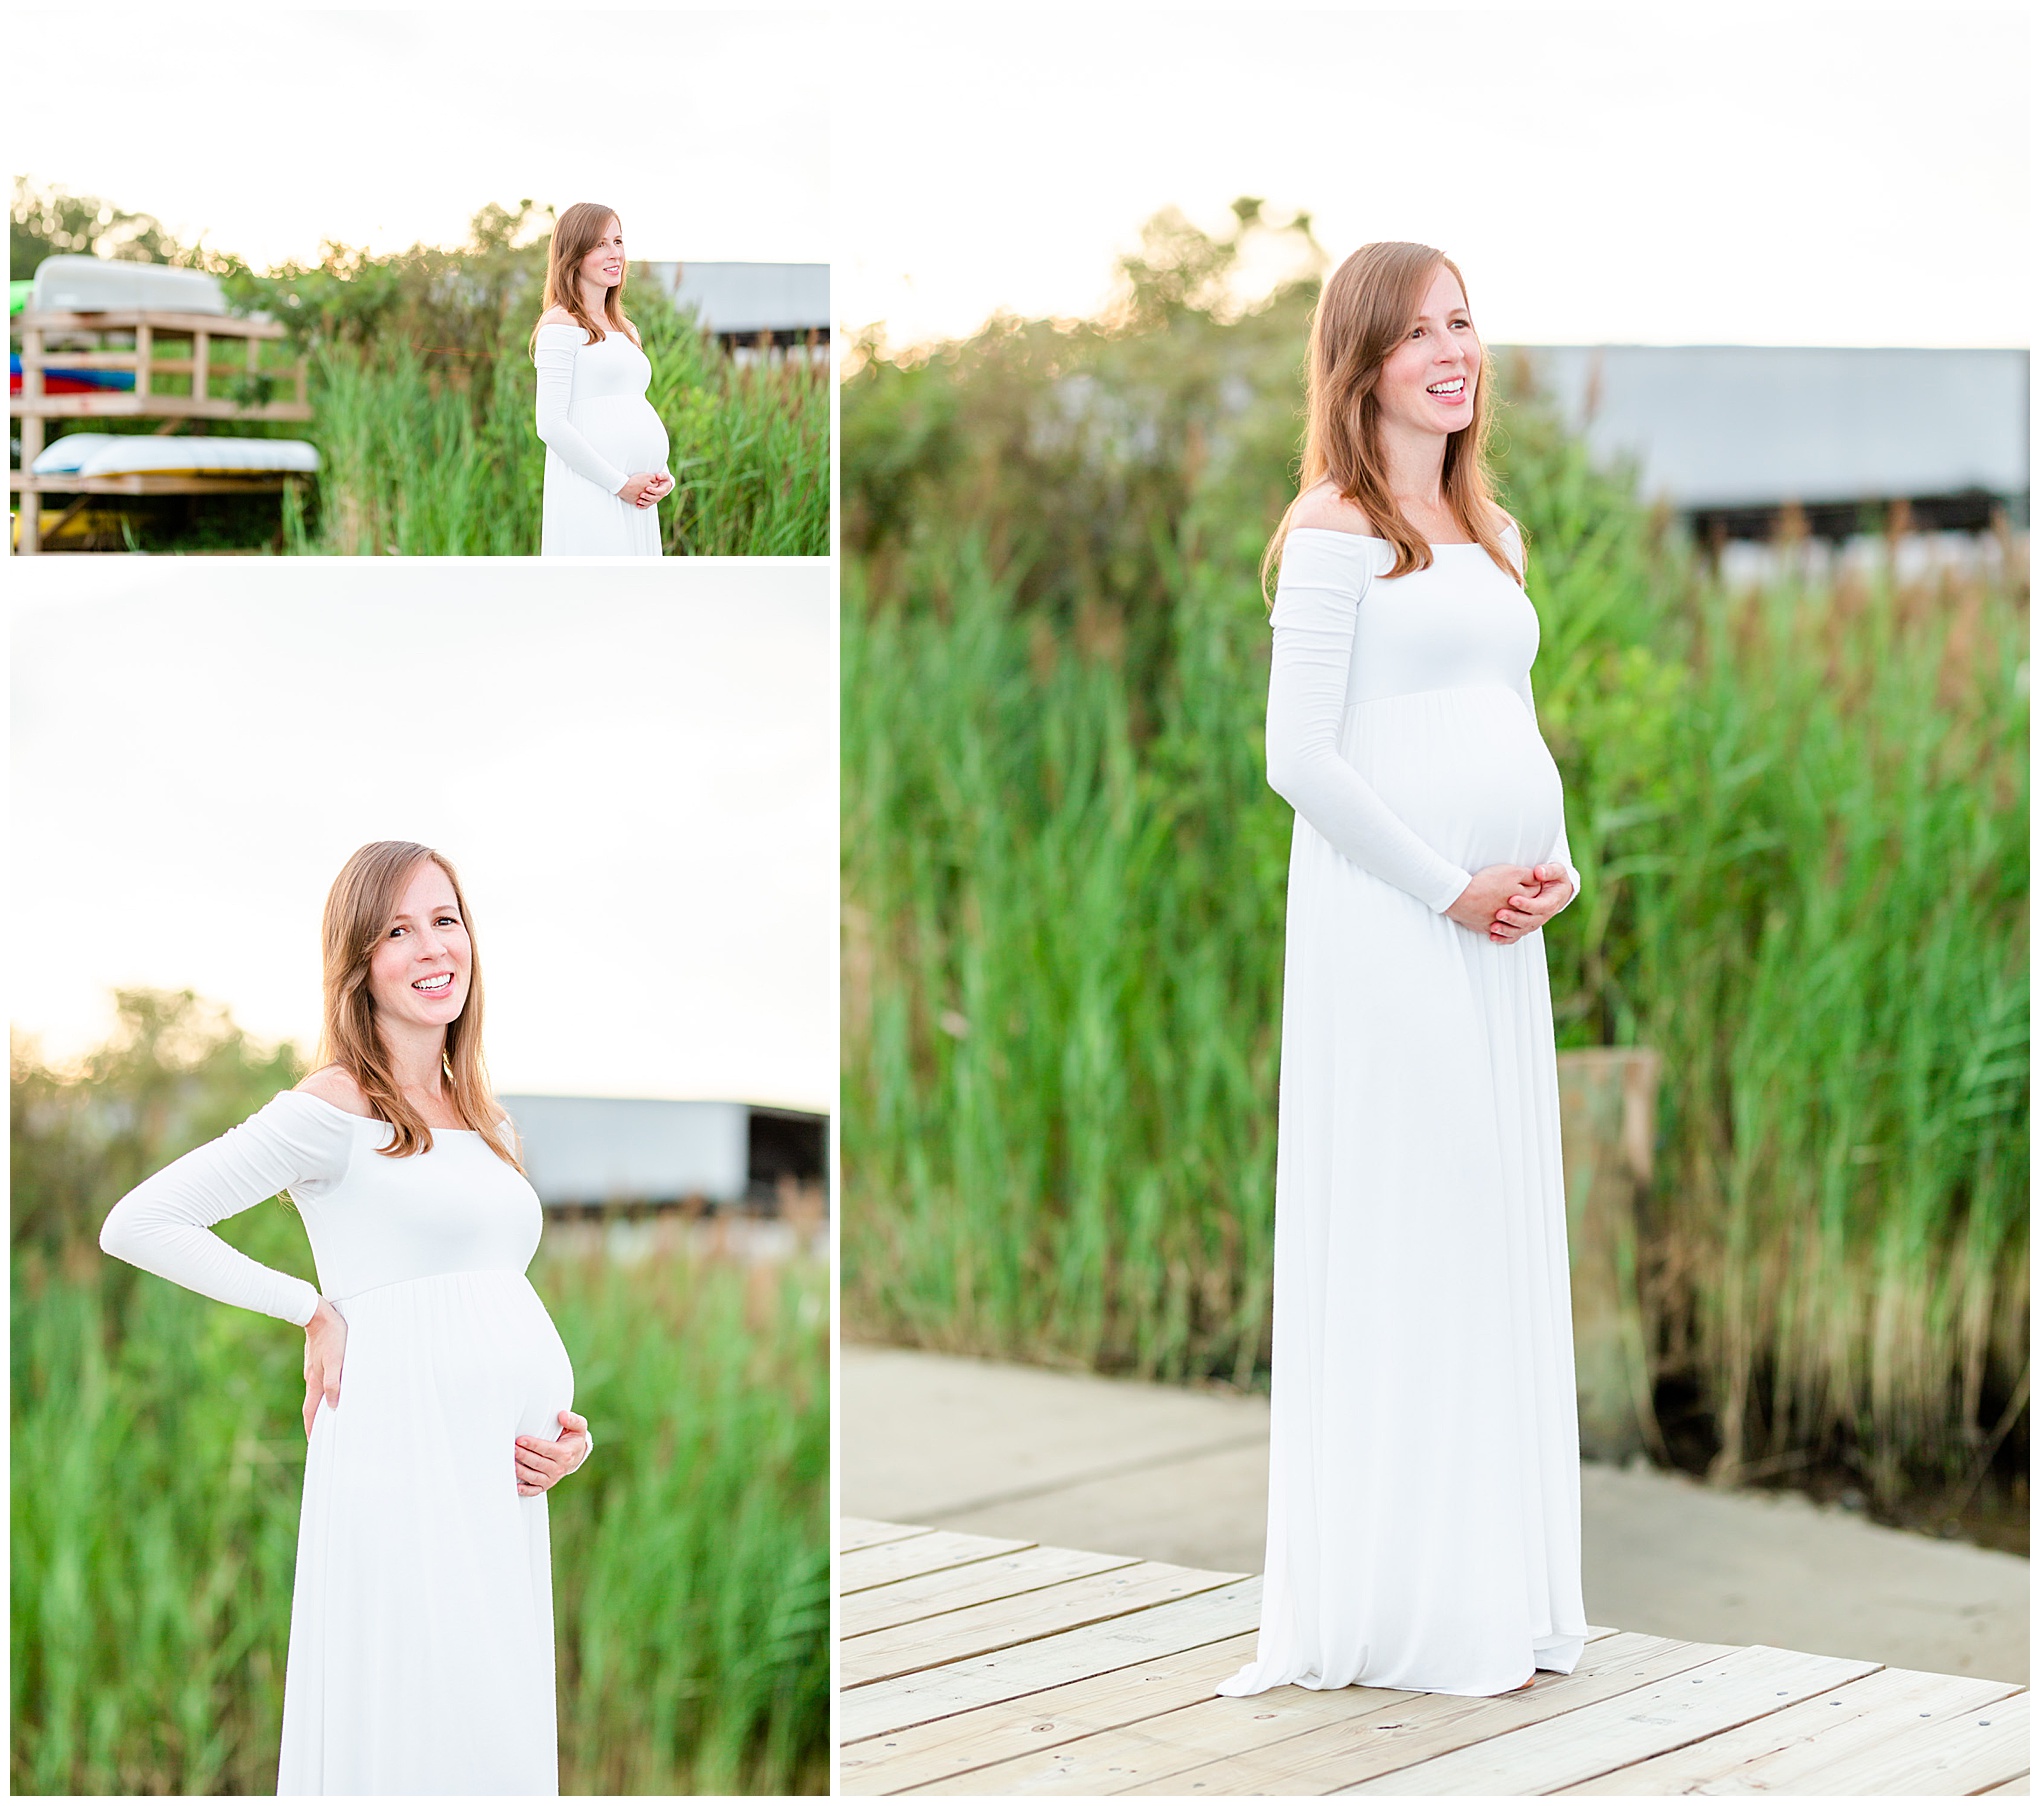 Annapolis waterfront maternity photos, Annapolis maternity photos, Annapolis maternity photographer, summer waterfront portraits, waterfront portraits, sunset portraits, sunset maternity portraits, sunset maternity photos, Annapolis photographer, DC maternity portraits, DC maternity photos, DC maternity photographer, Rachel E.H. Photography, summer maternity photos, maternity photos style, golden hour